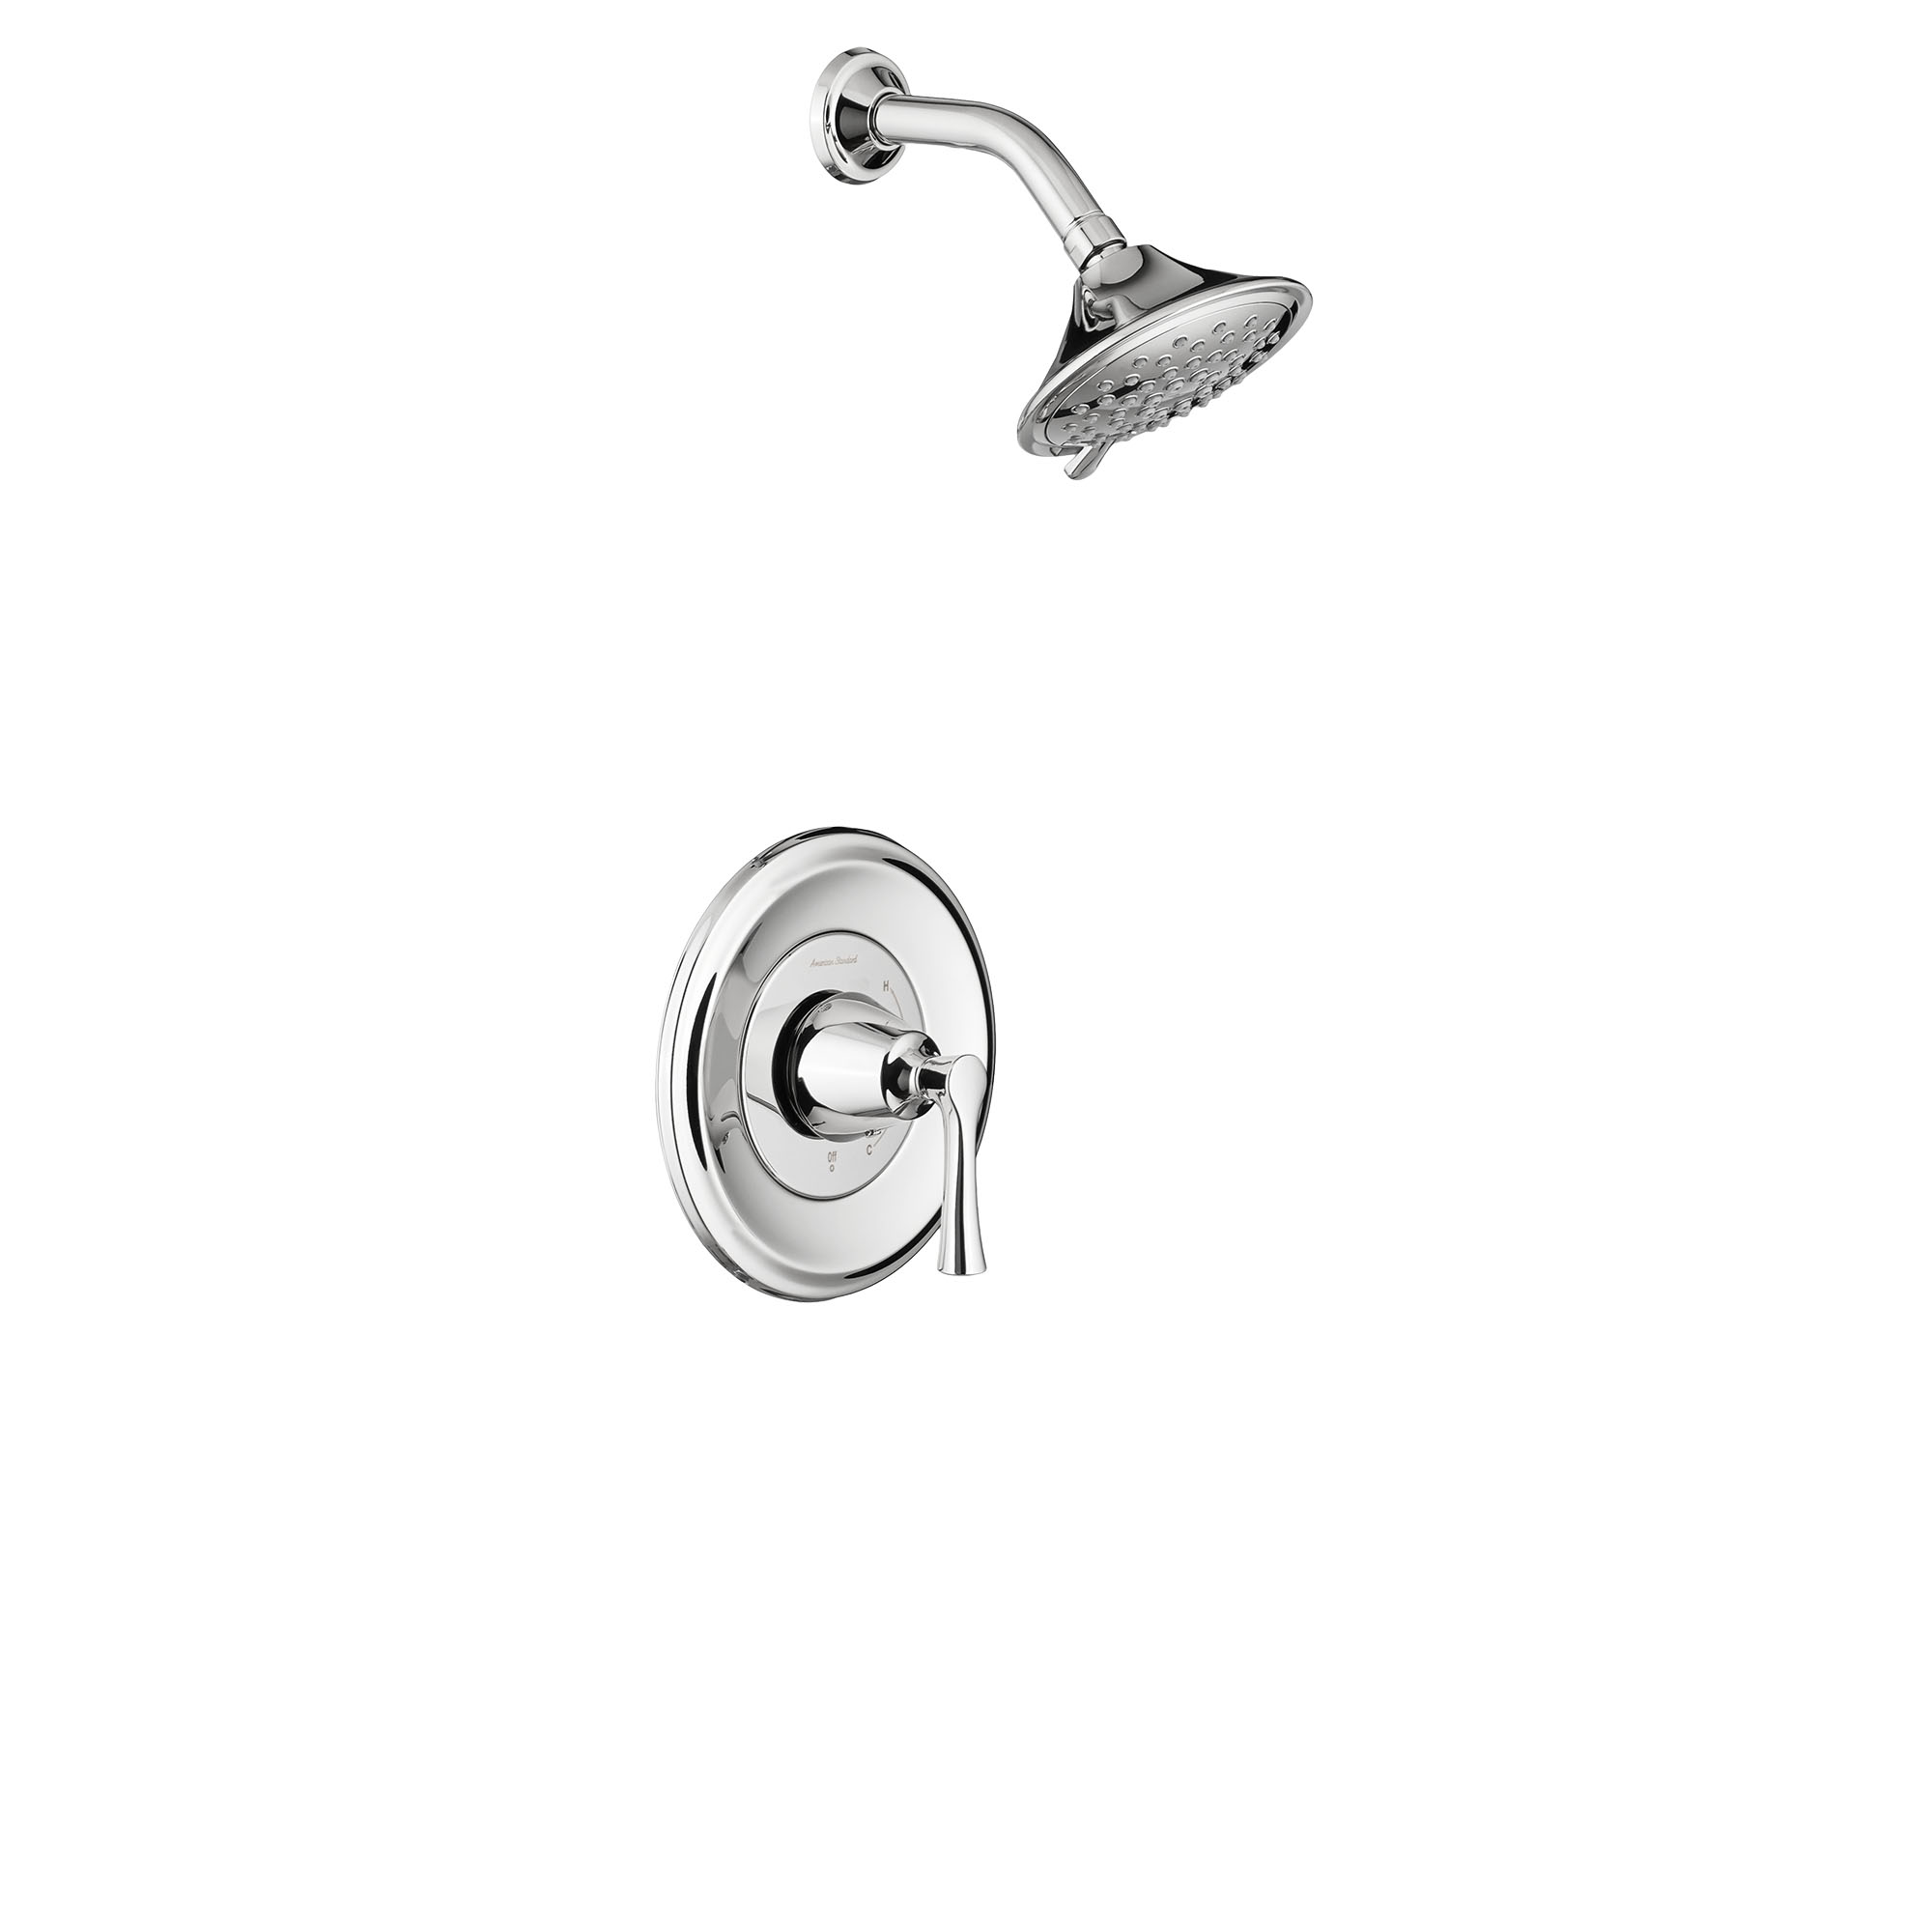 Estate 2.5 GPM Shower Trim Kit with Lever Handle